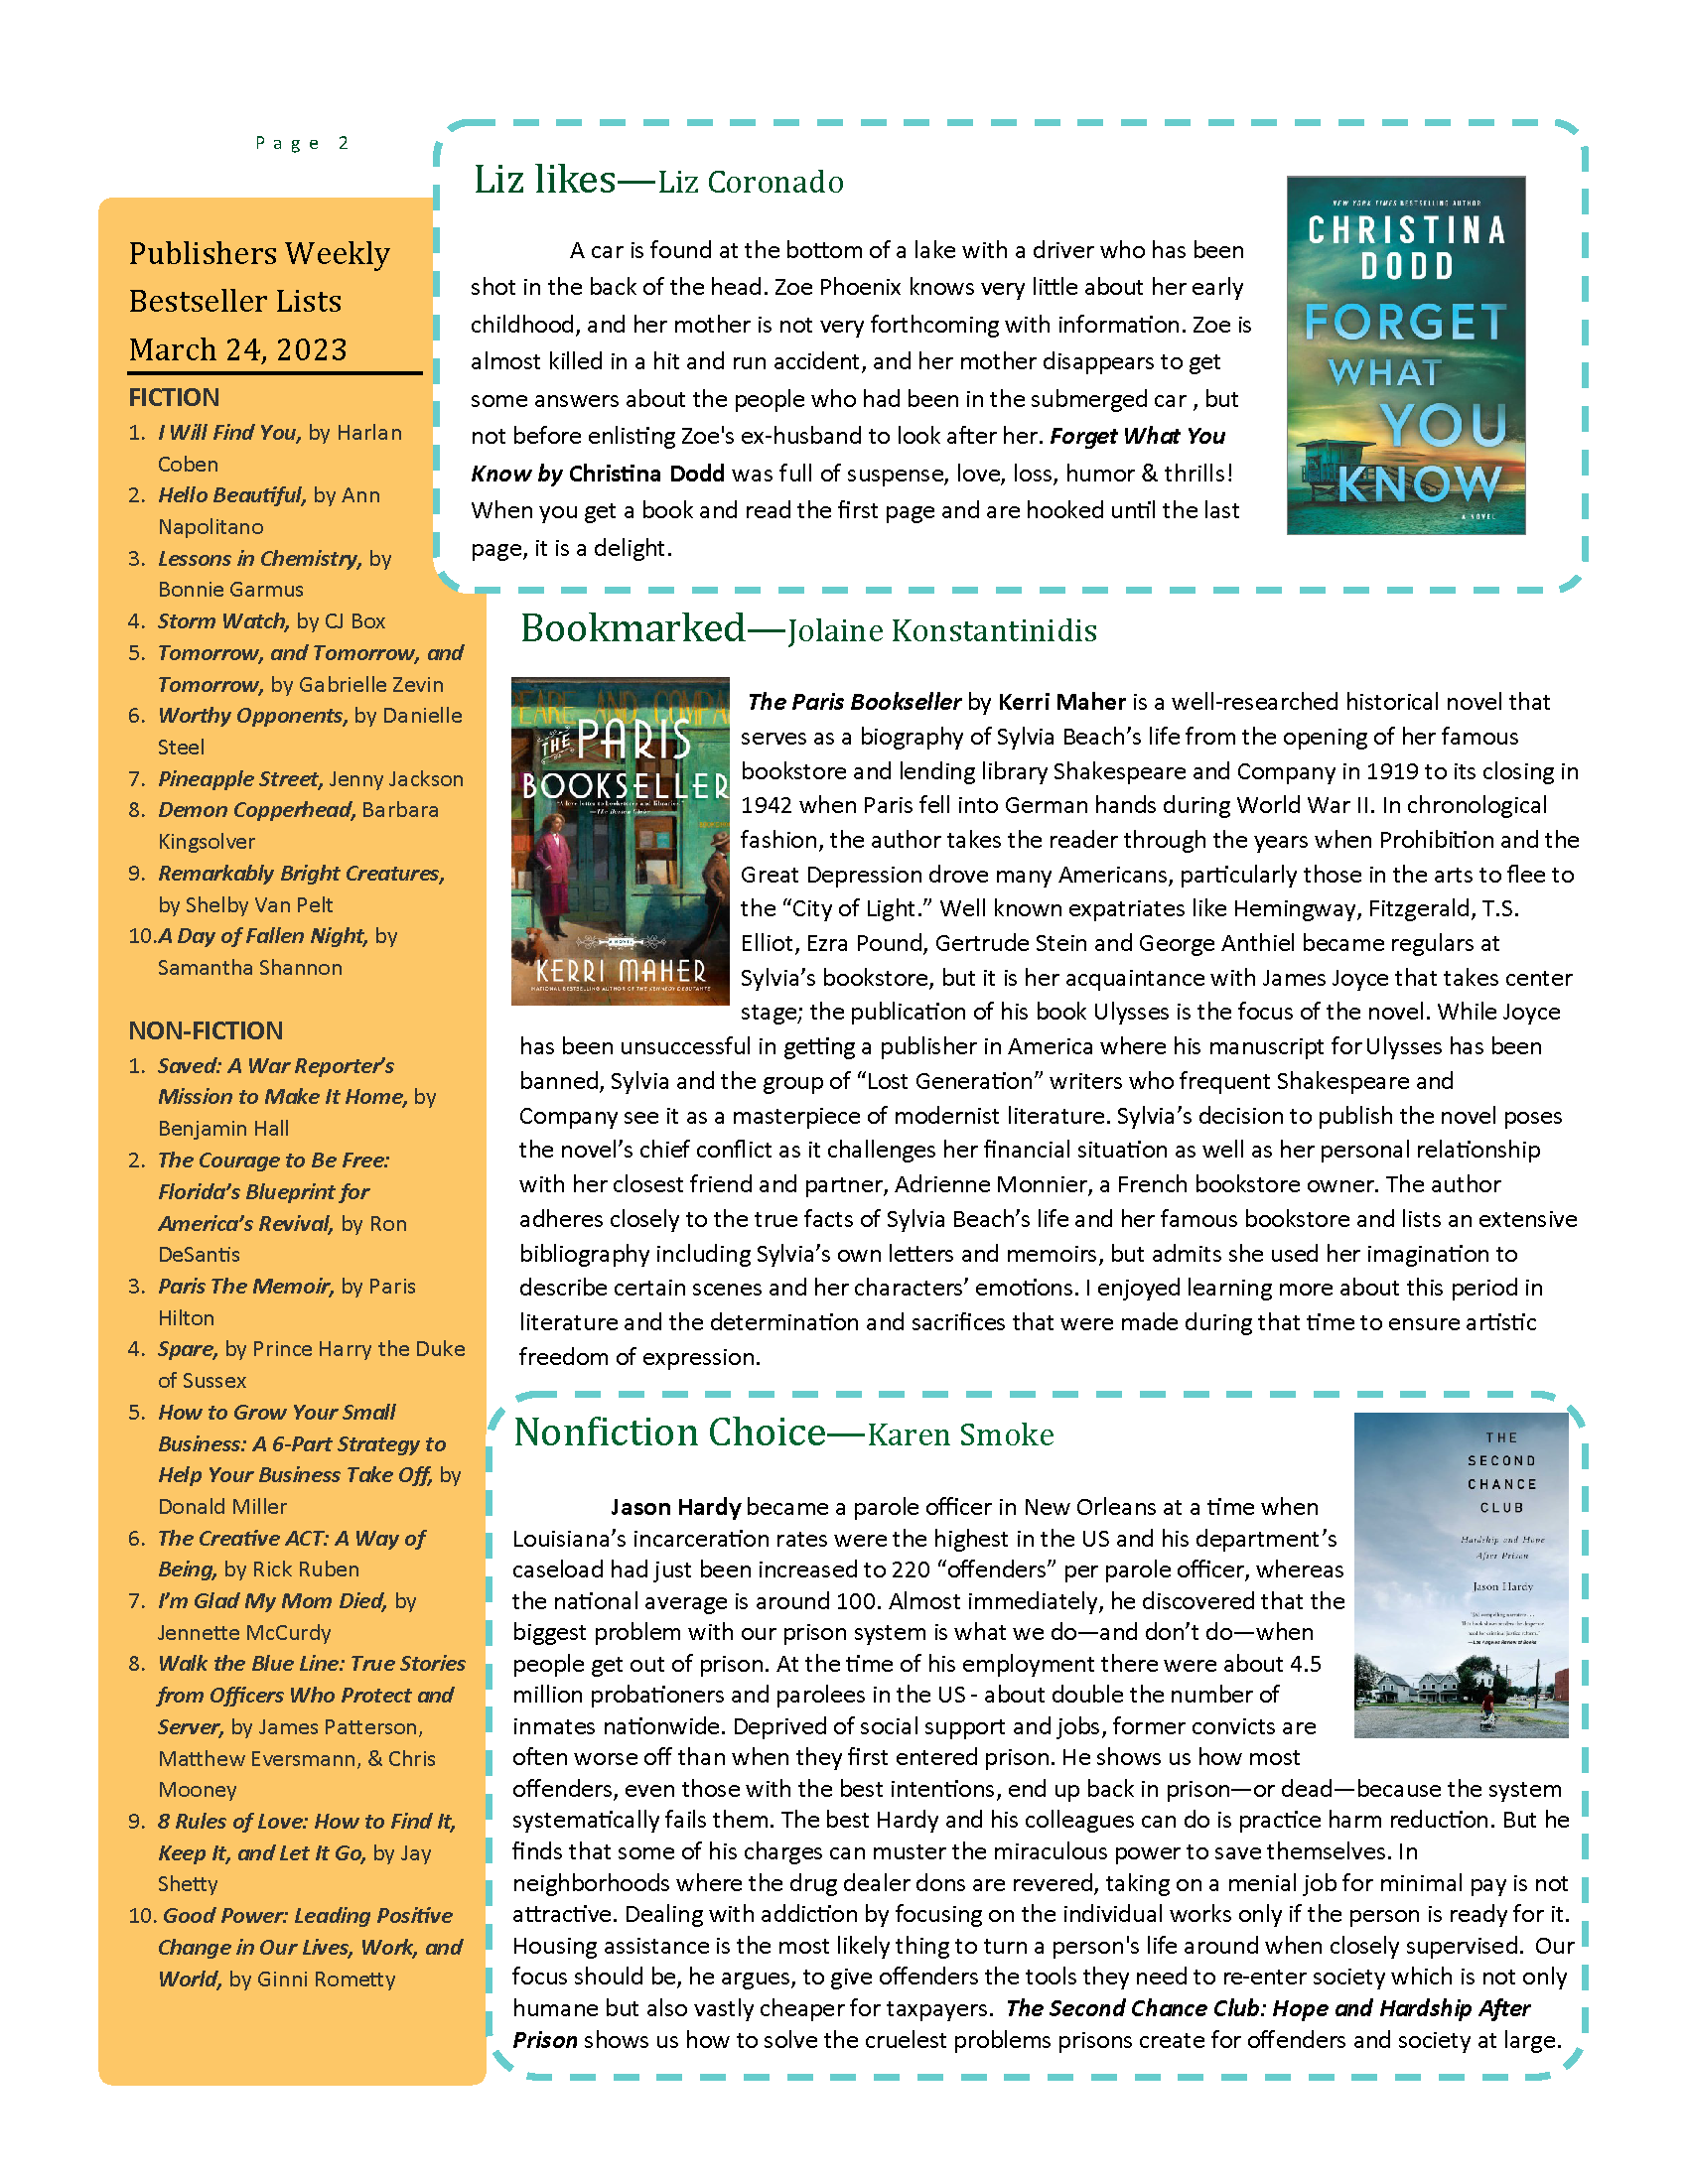 image of newsletter. PDF available in the link at the top of the page.